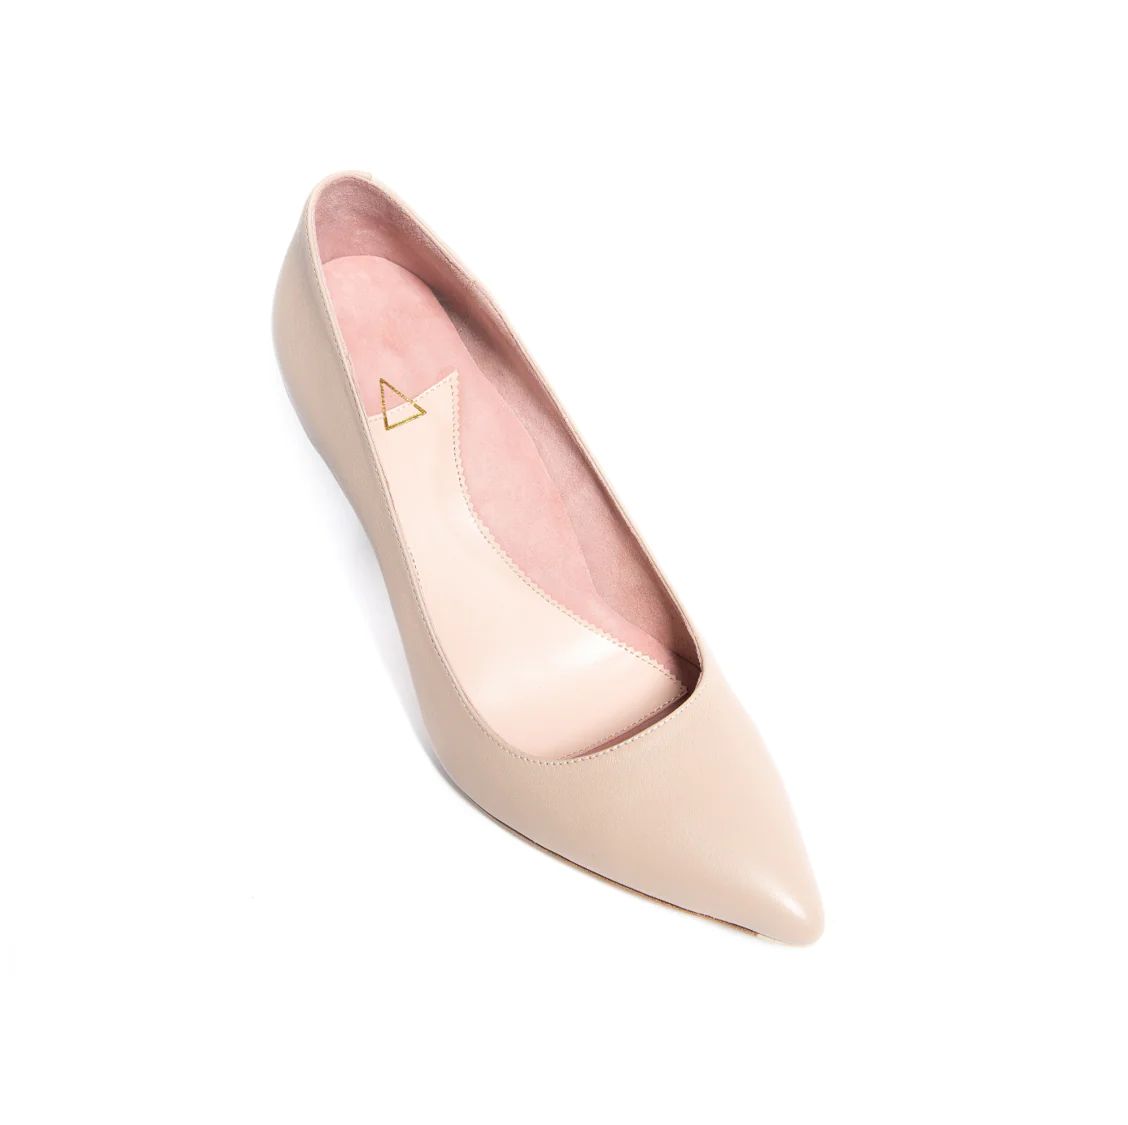 Bossy Beige Leather Pump | ALLY Shoes